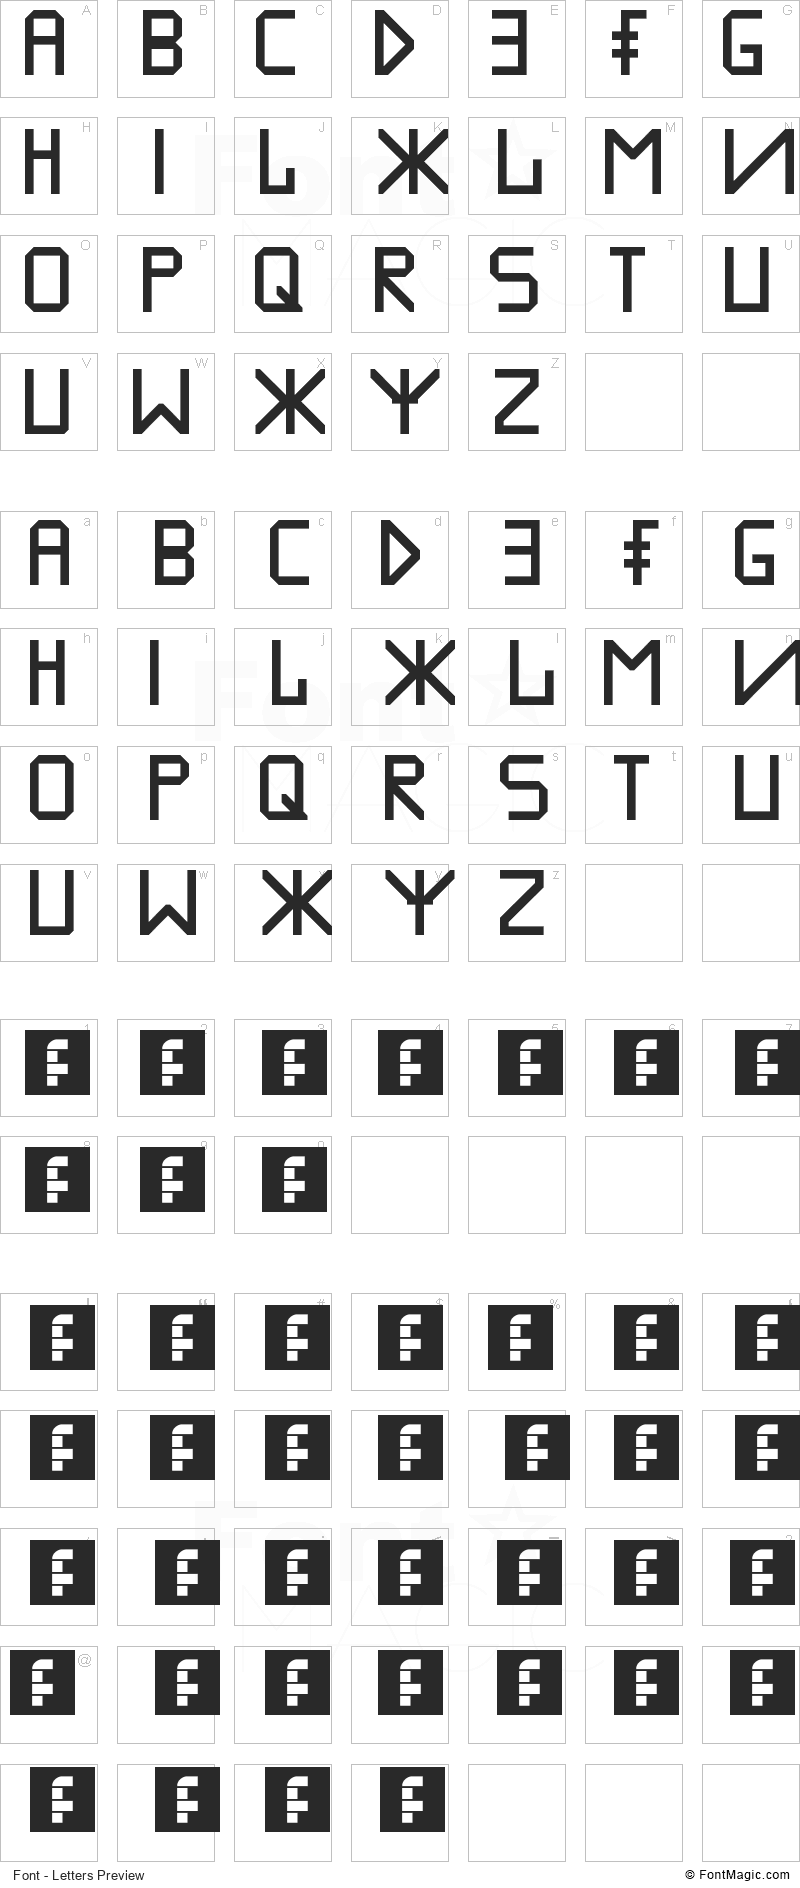 Inmodify Font - All Latters Preview Chart